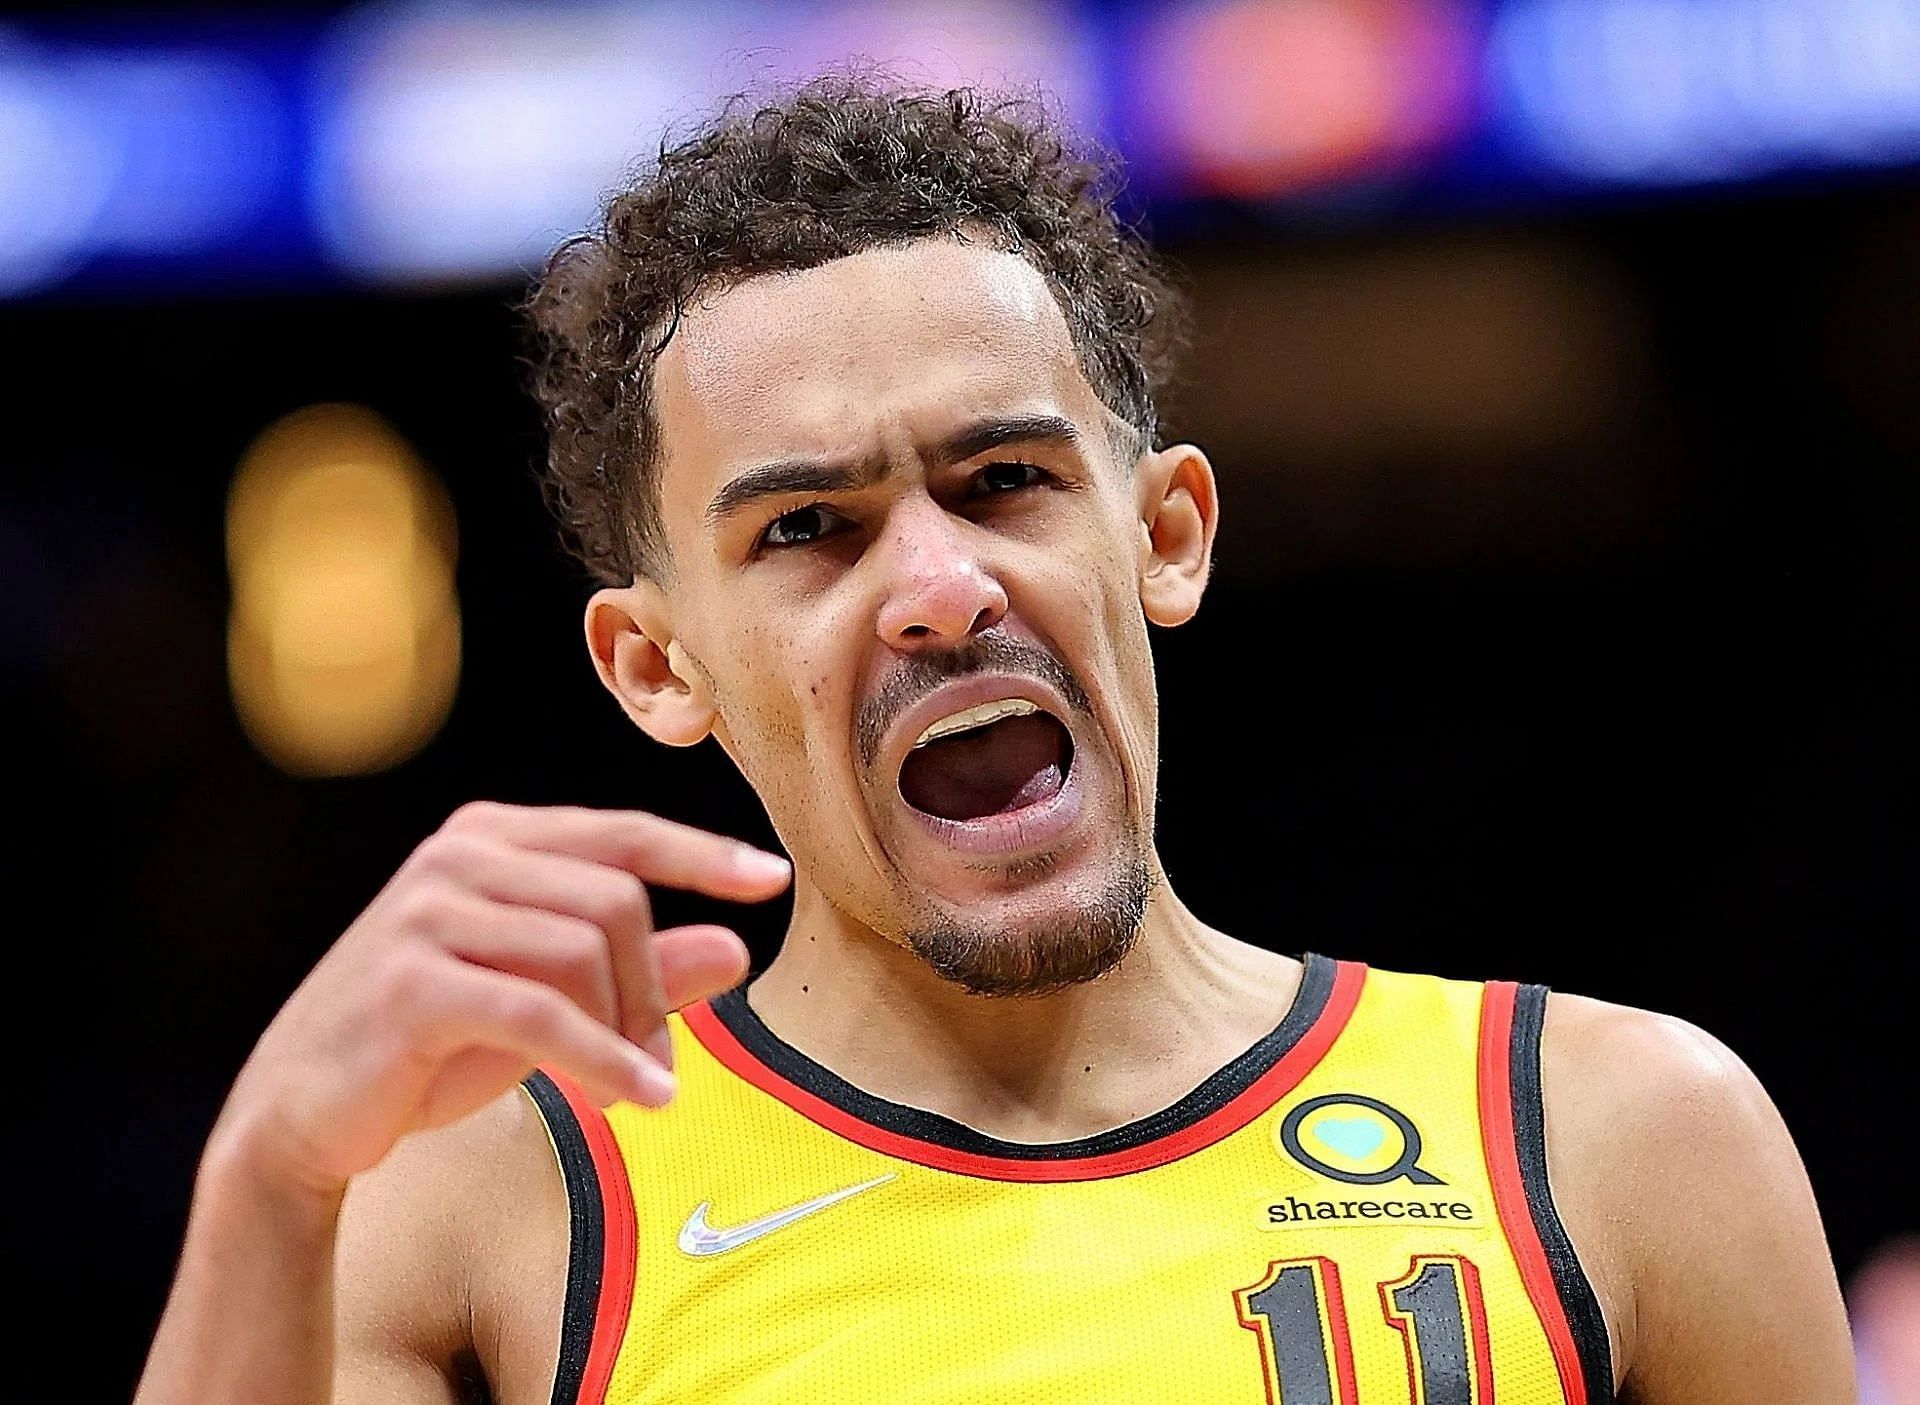 Atlanta Hawks All-Star guard Trae Young said he wants to achieve more with the team moving forward.